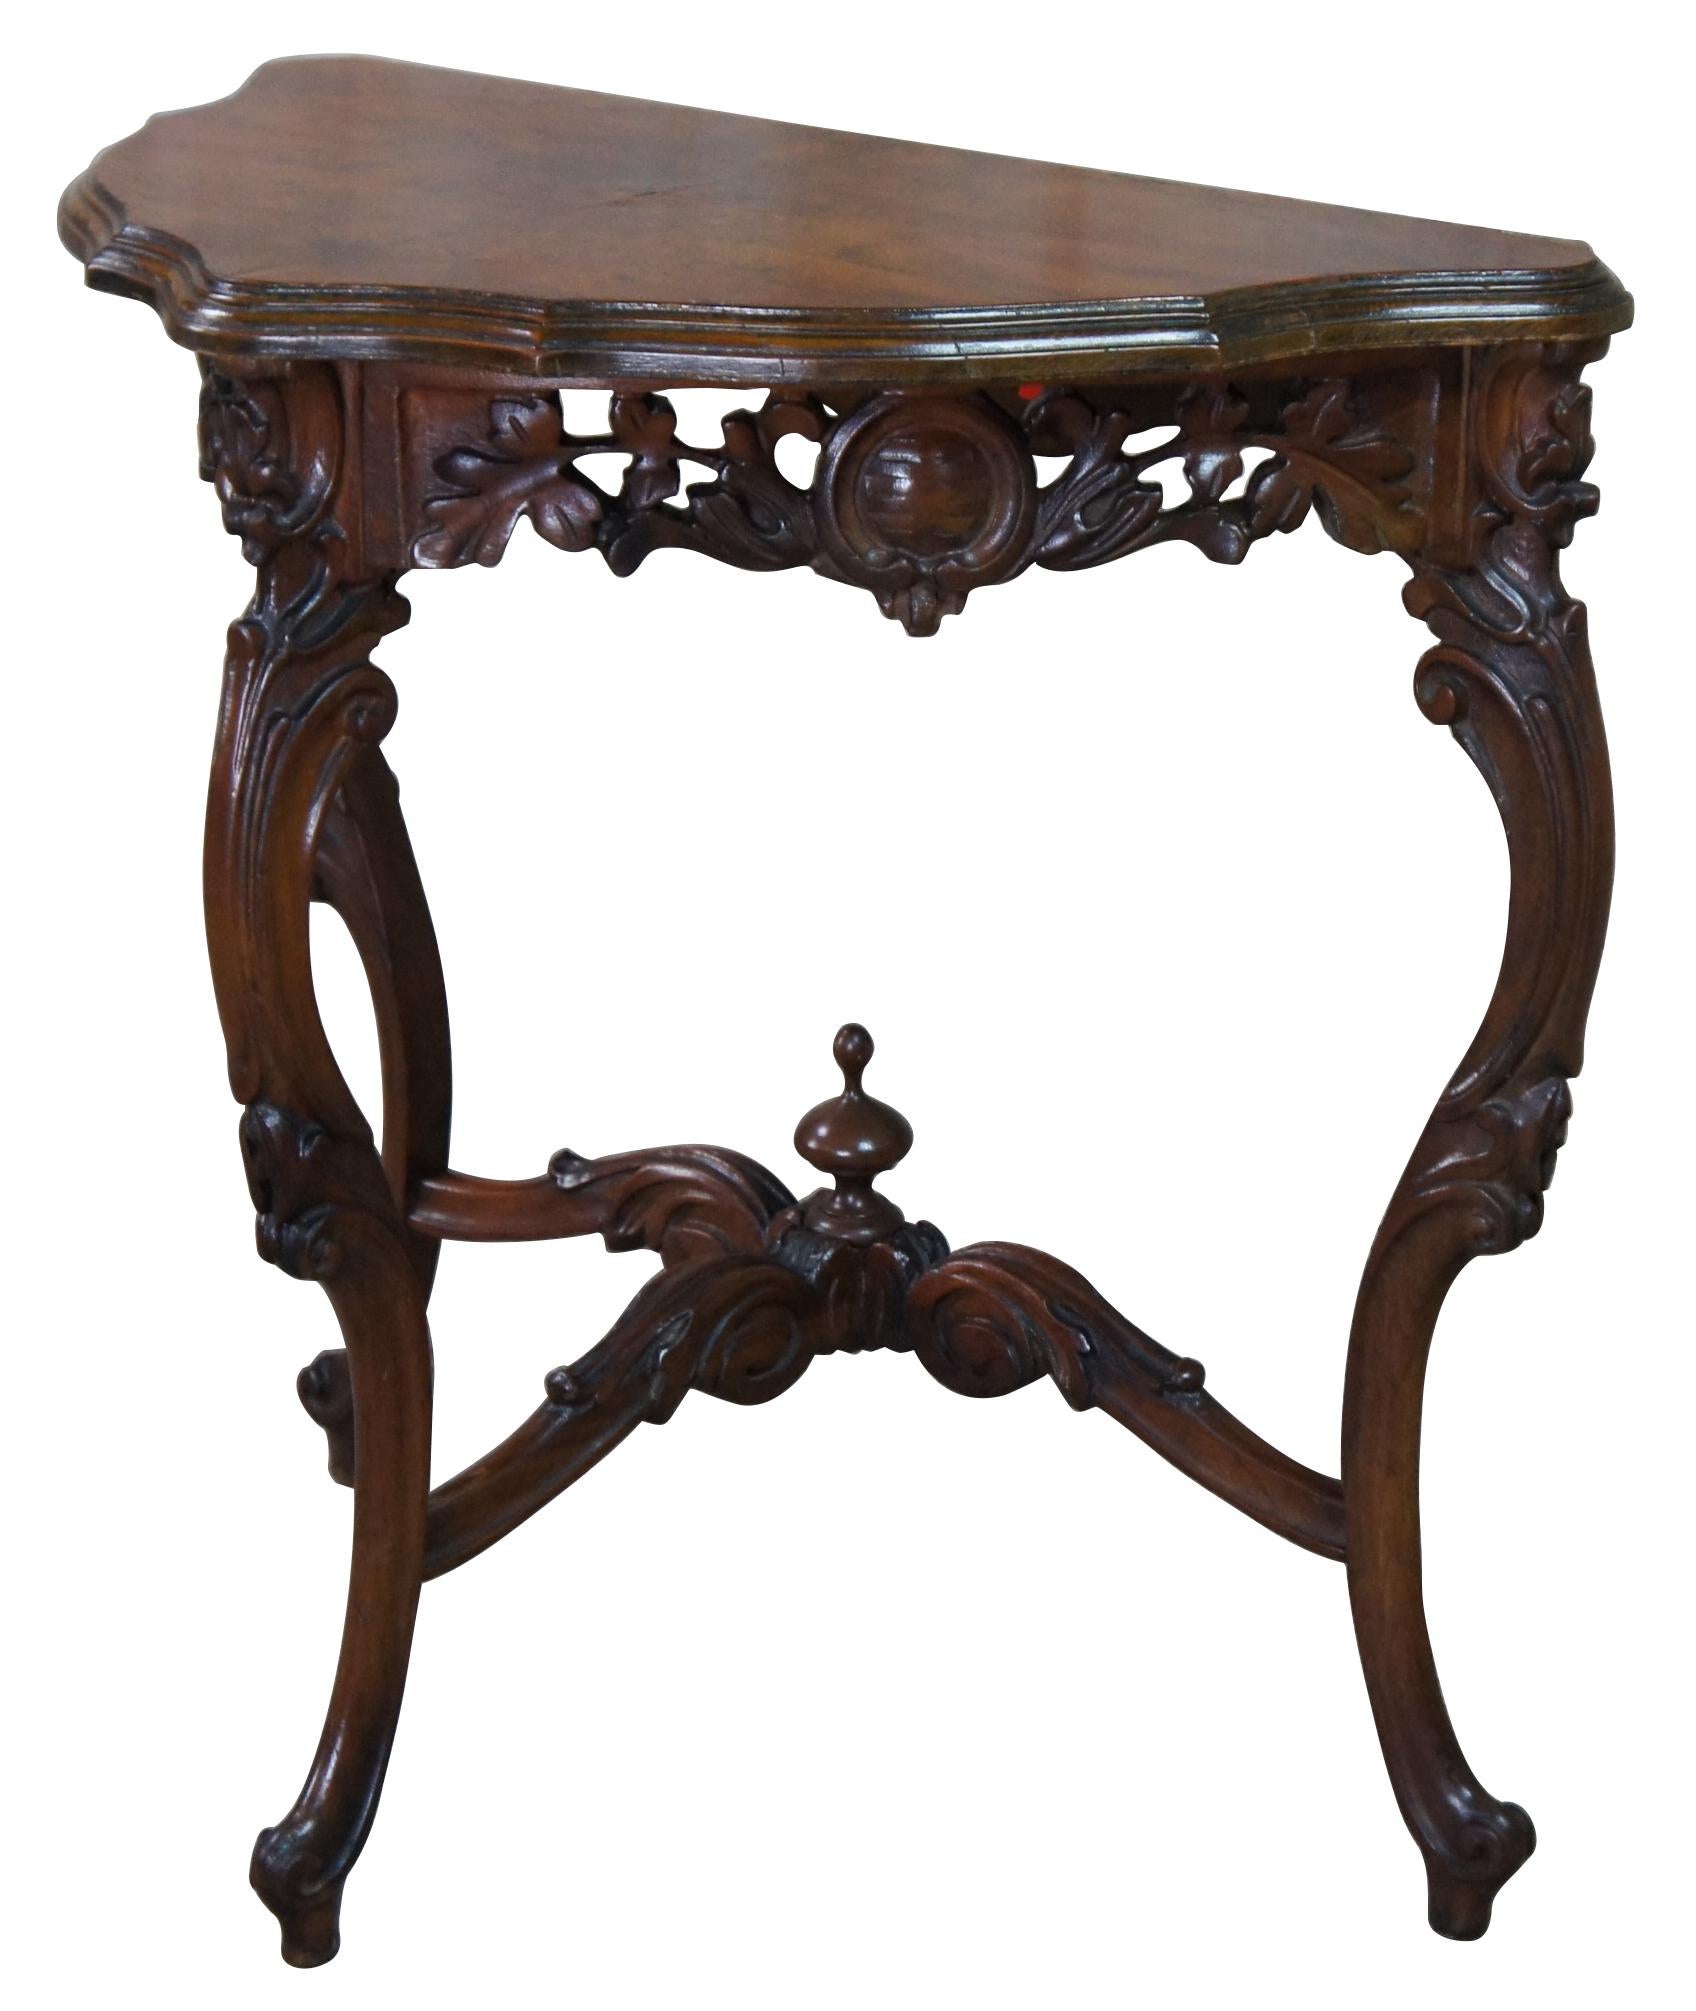 Antique French Baroque or Rococo side console table. Made of burled Walnut featuring triangular form with a pierced apron centered by baroque shields and foliate carvings. The table is supported by three reverse scrolled legs connected by an ornate